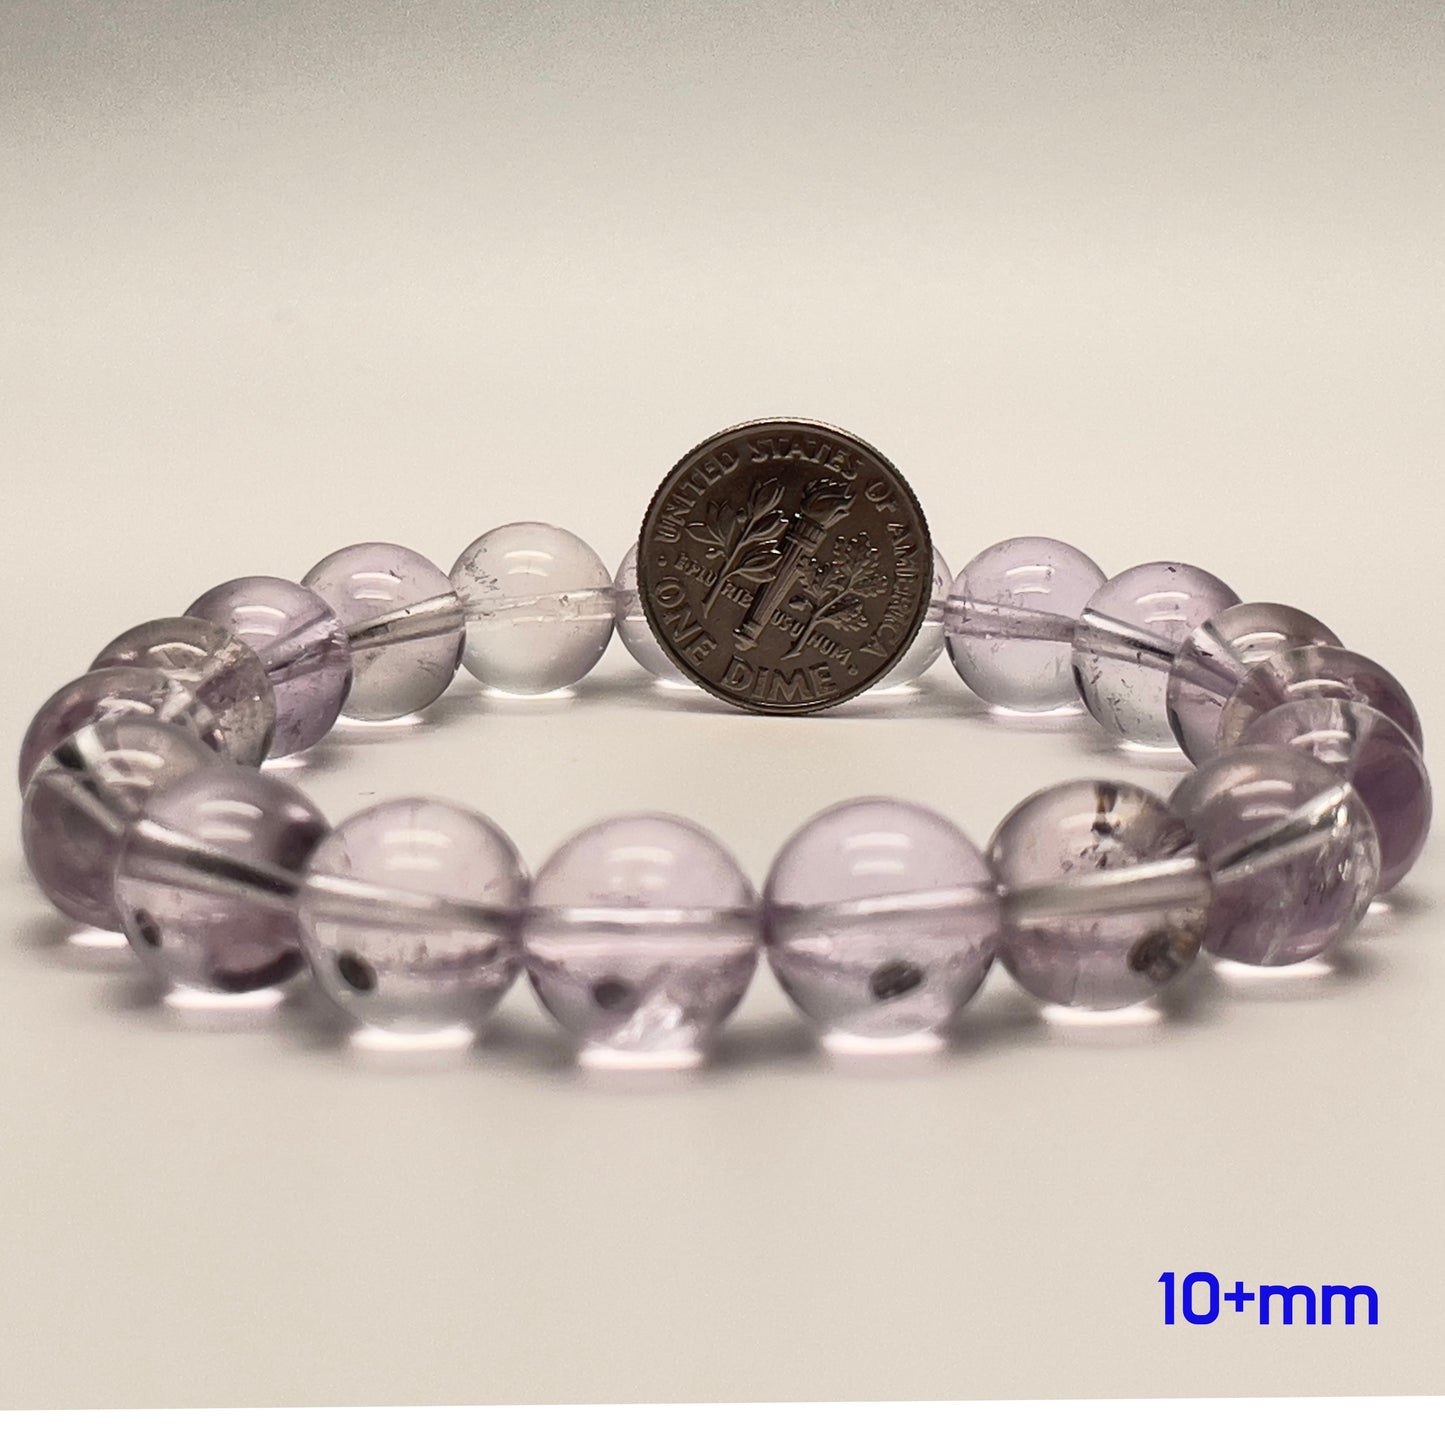 Stonelry Natural Amethyst Beaded Bracelet (10 to 12+ mm)